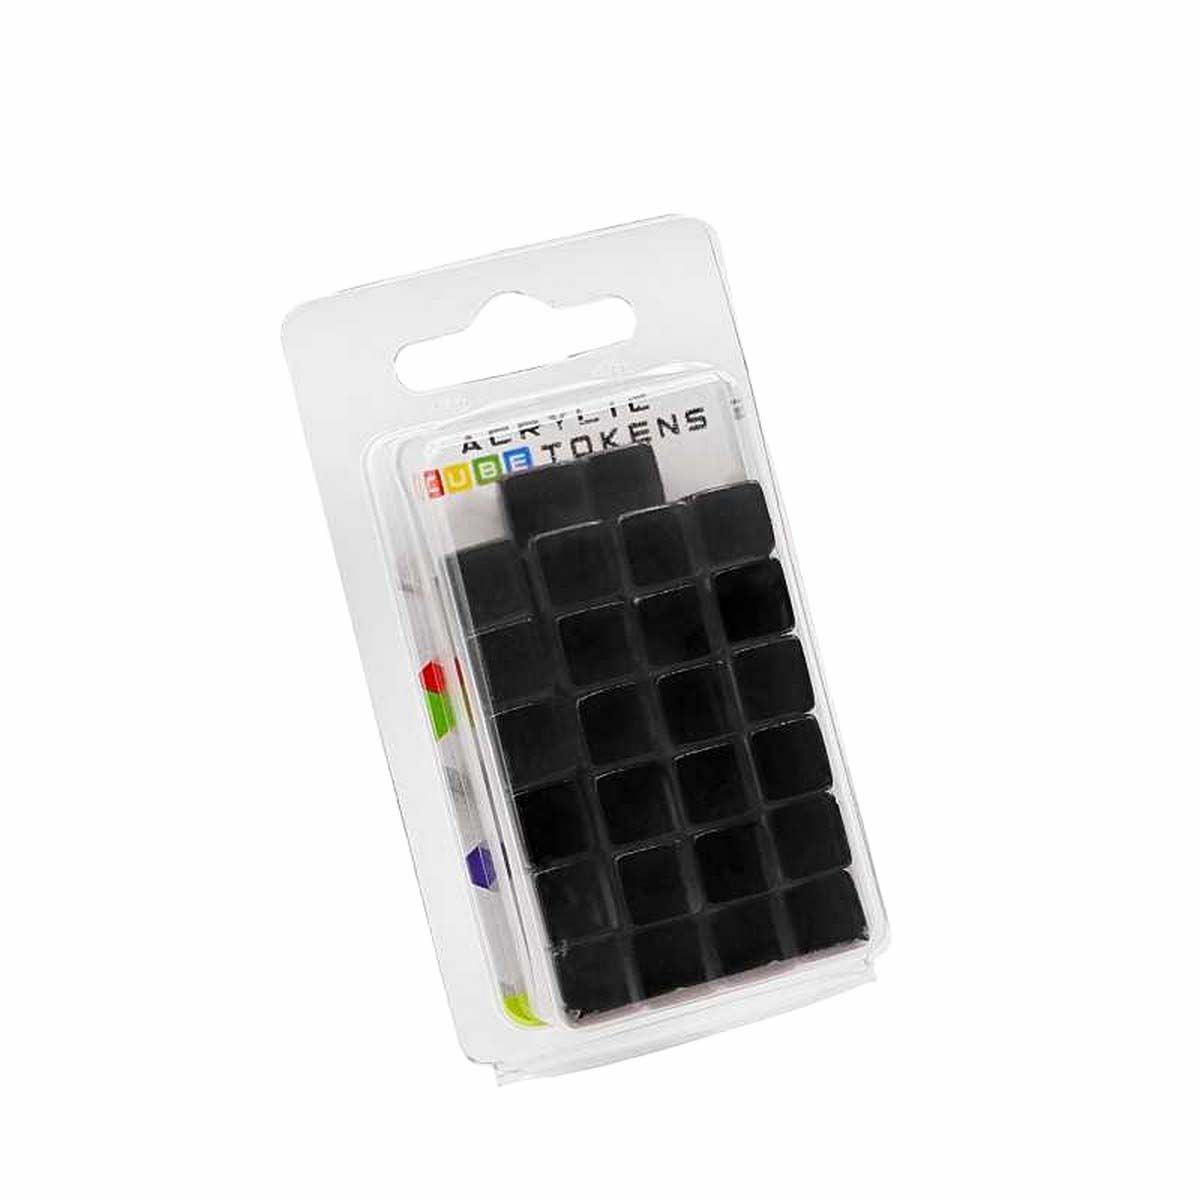 Gaming Tokens - Black Cubes 10mm